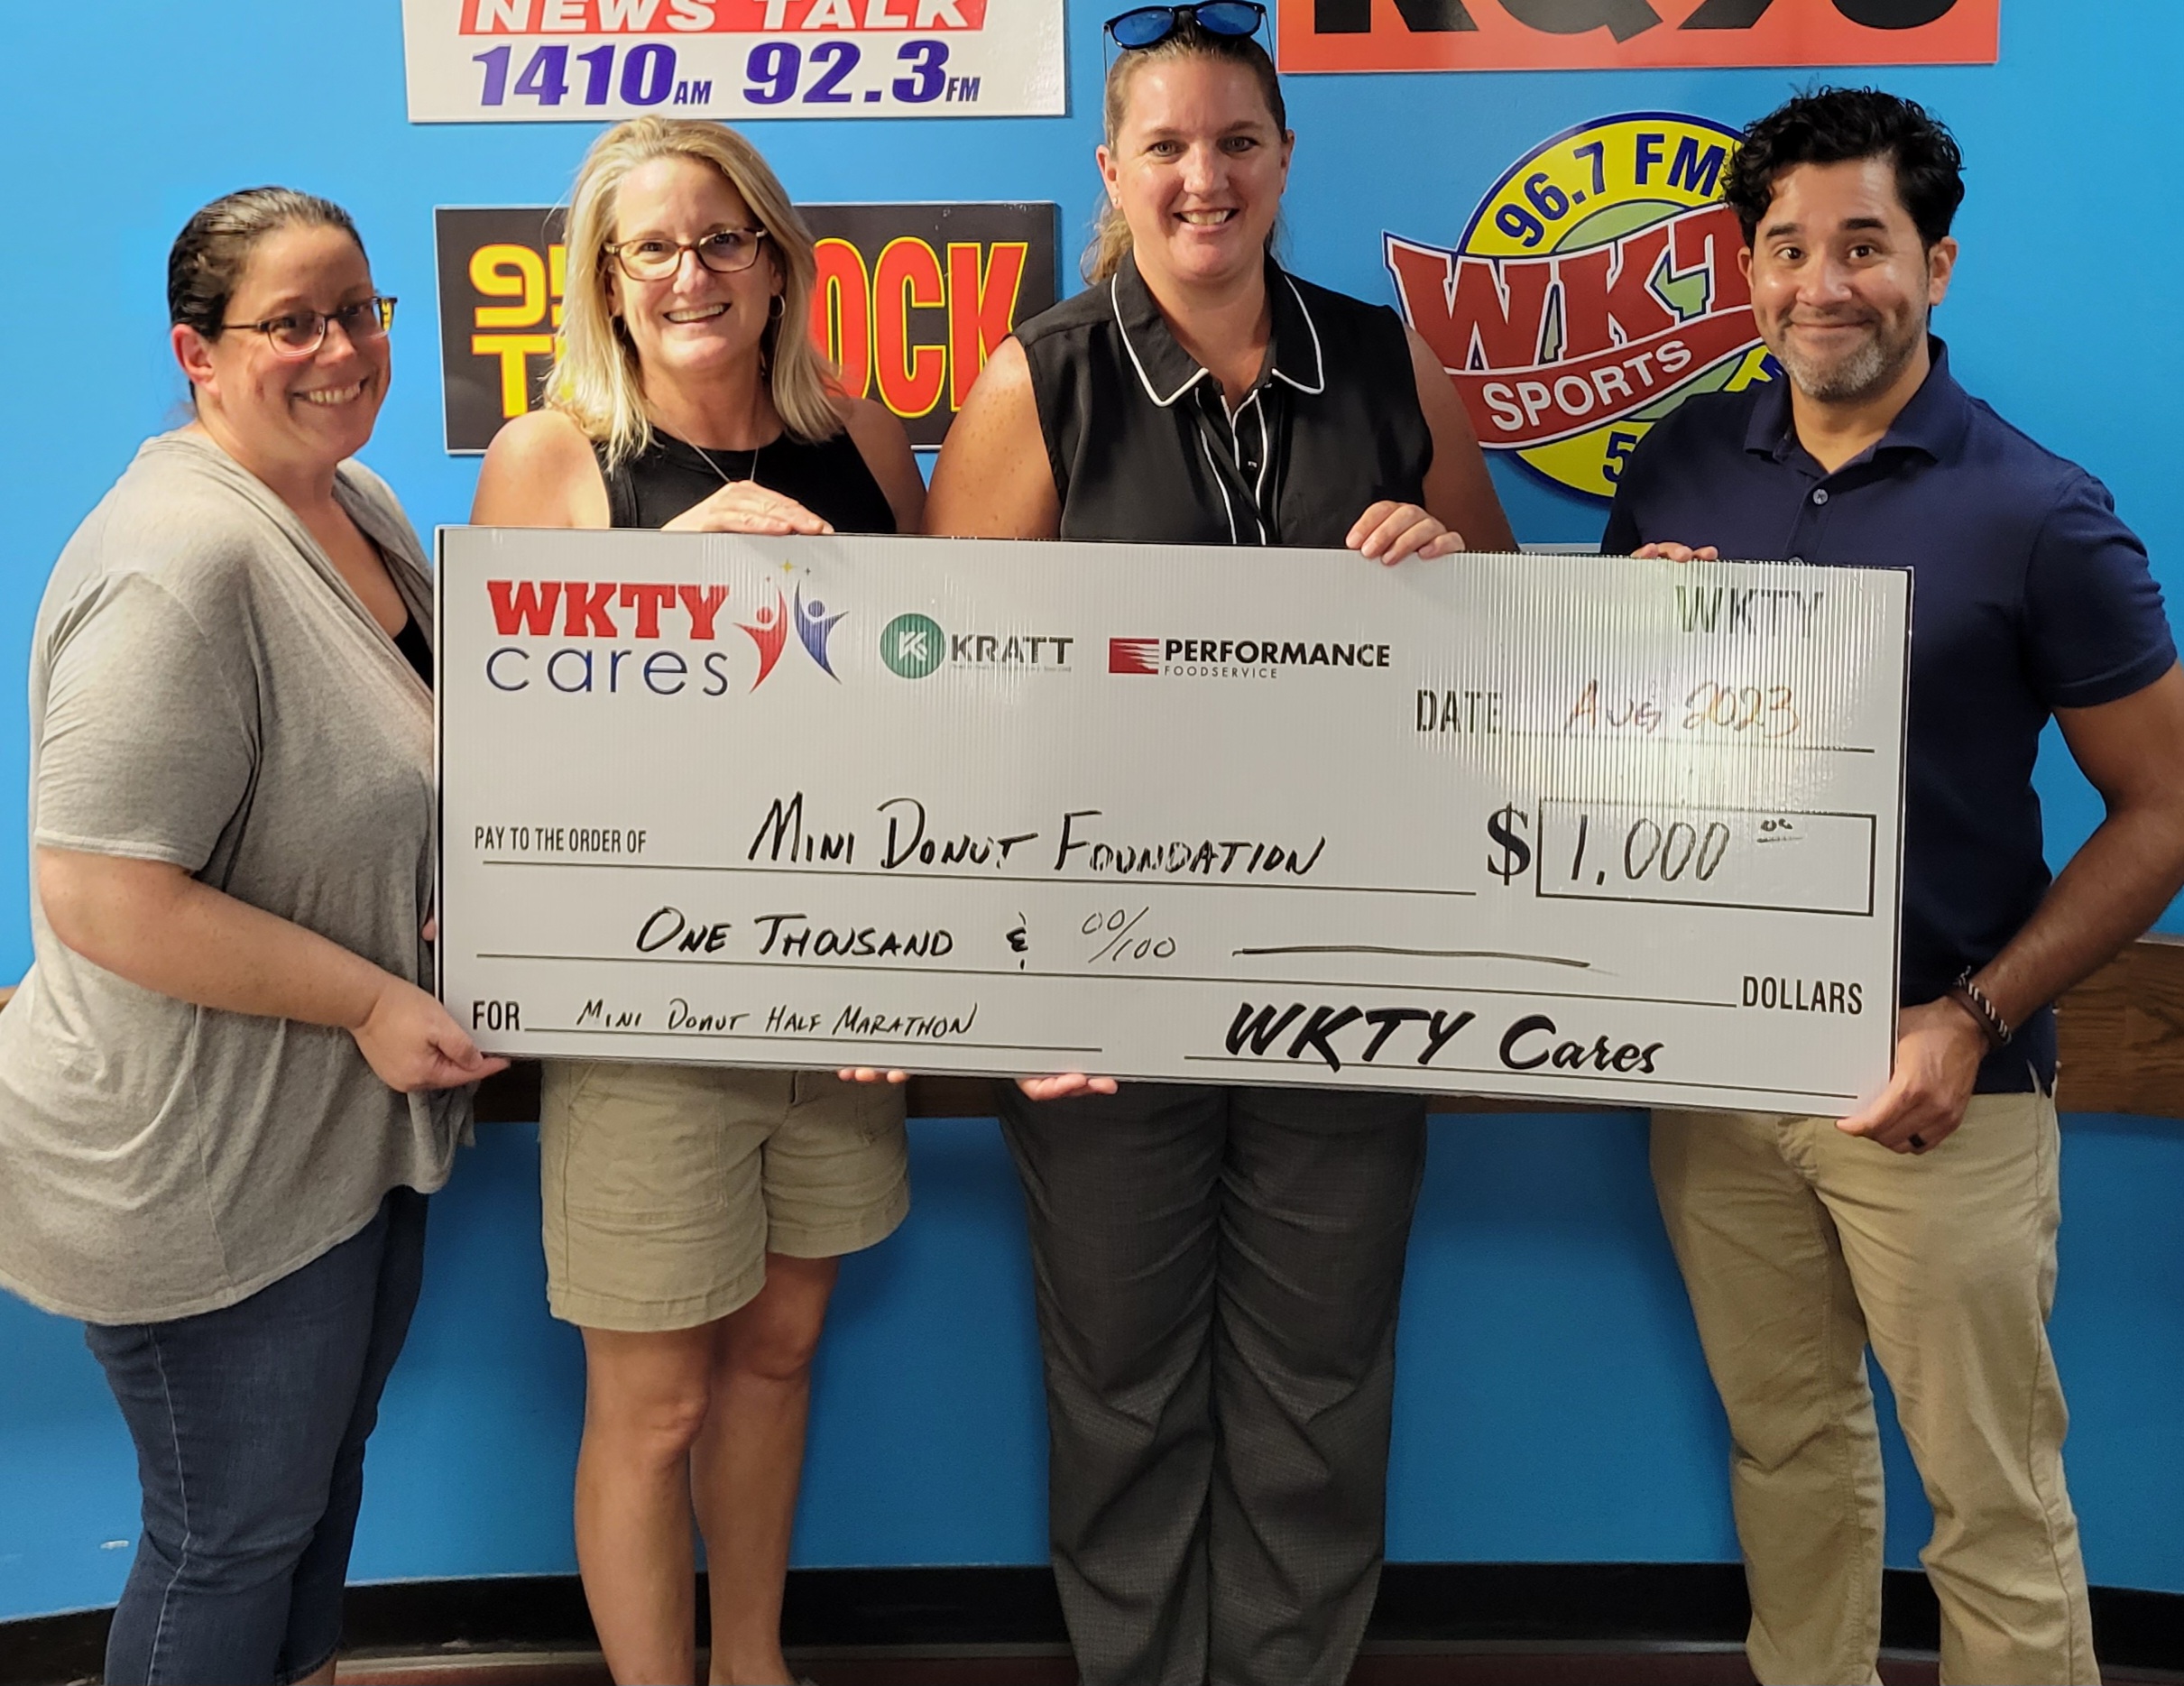 WKTY Cares about the Mini Donut Foundation